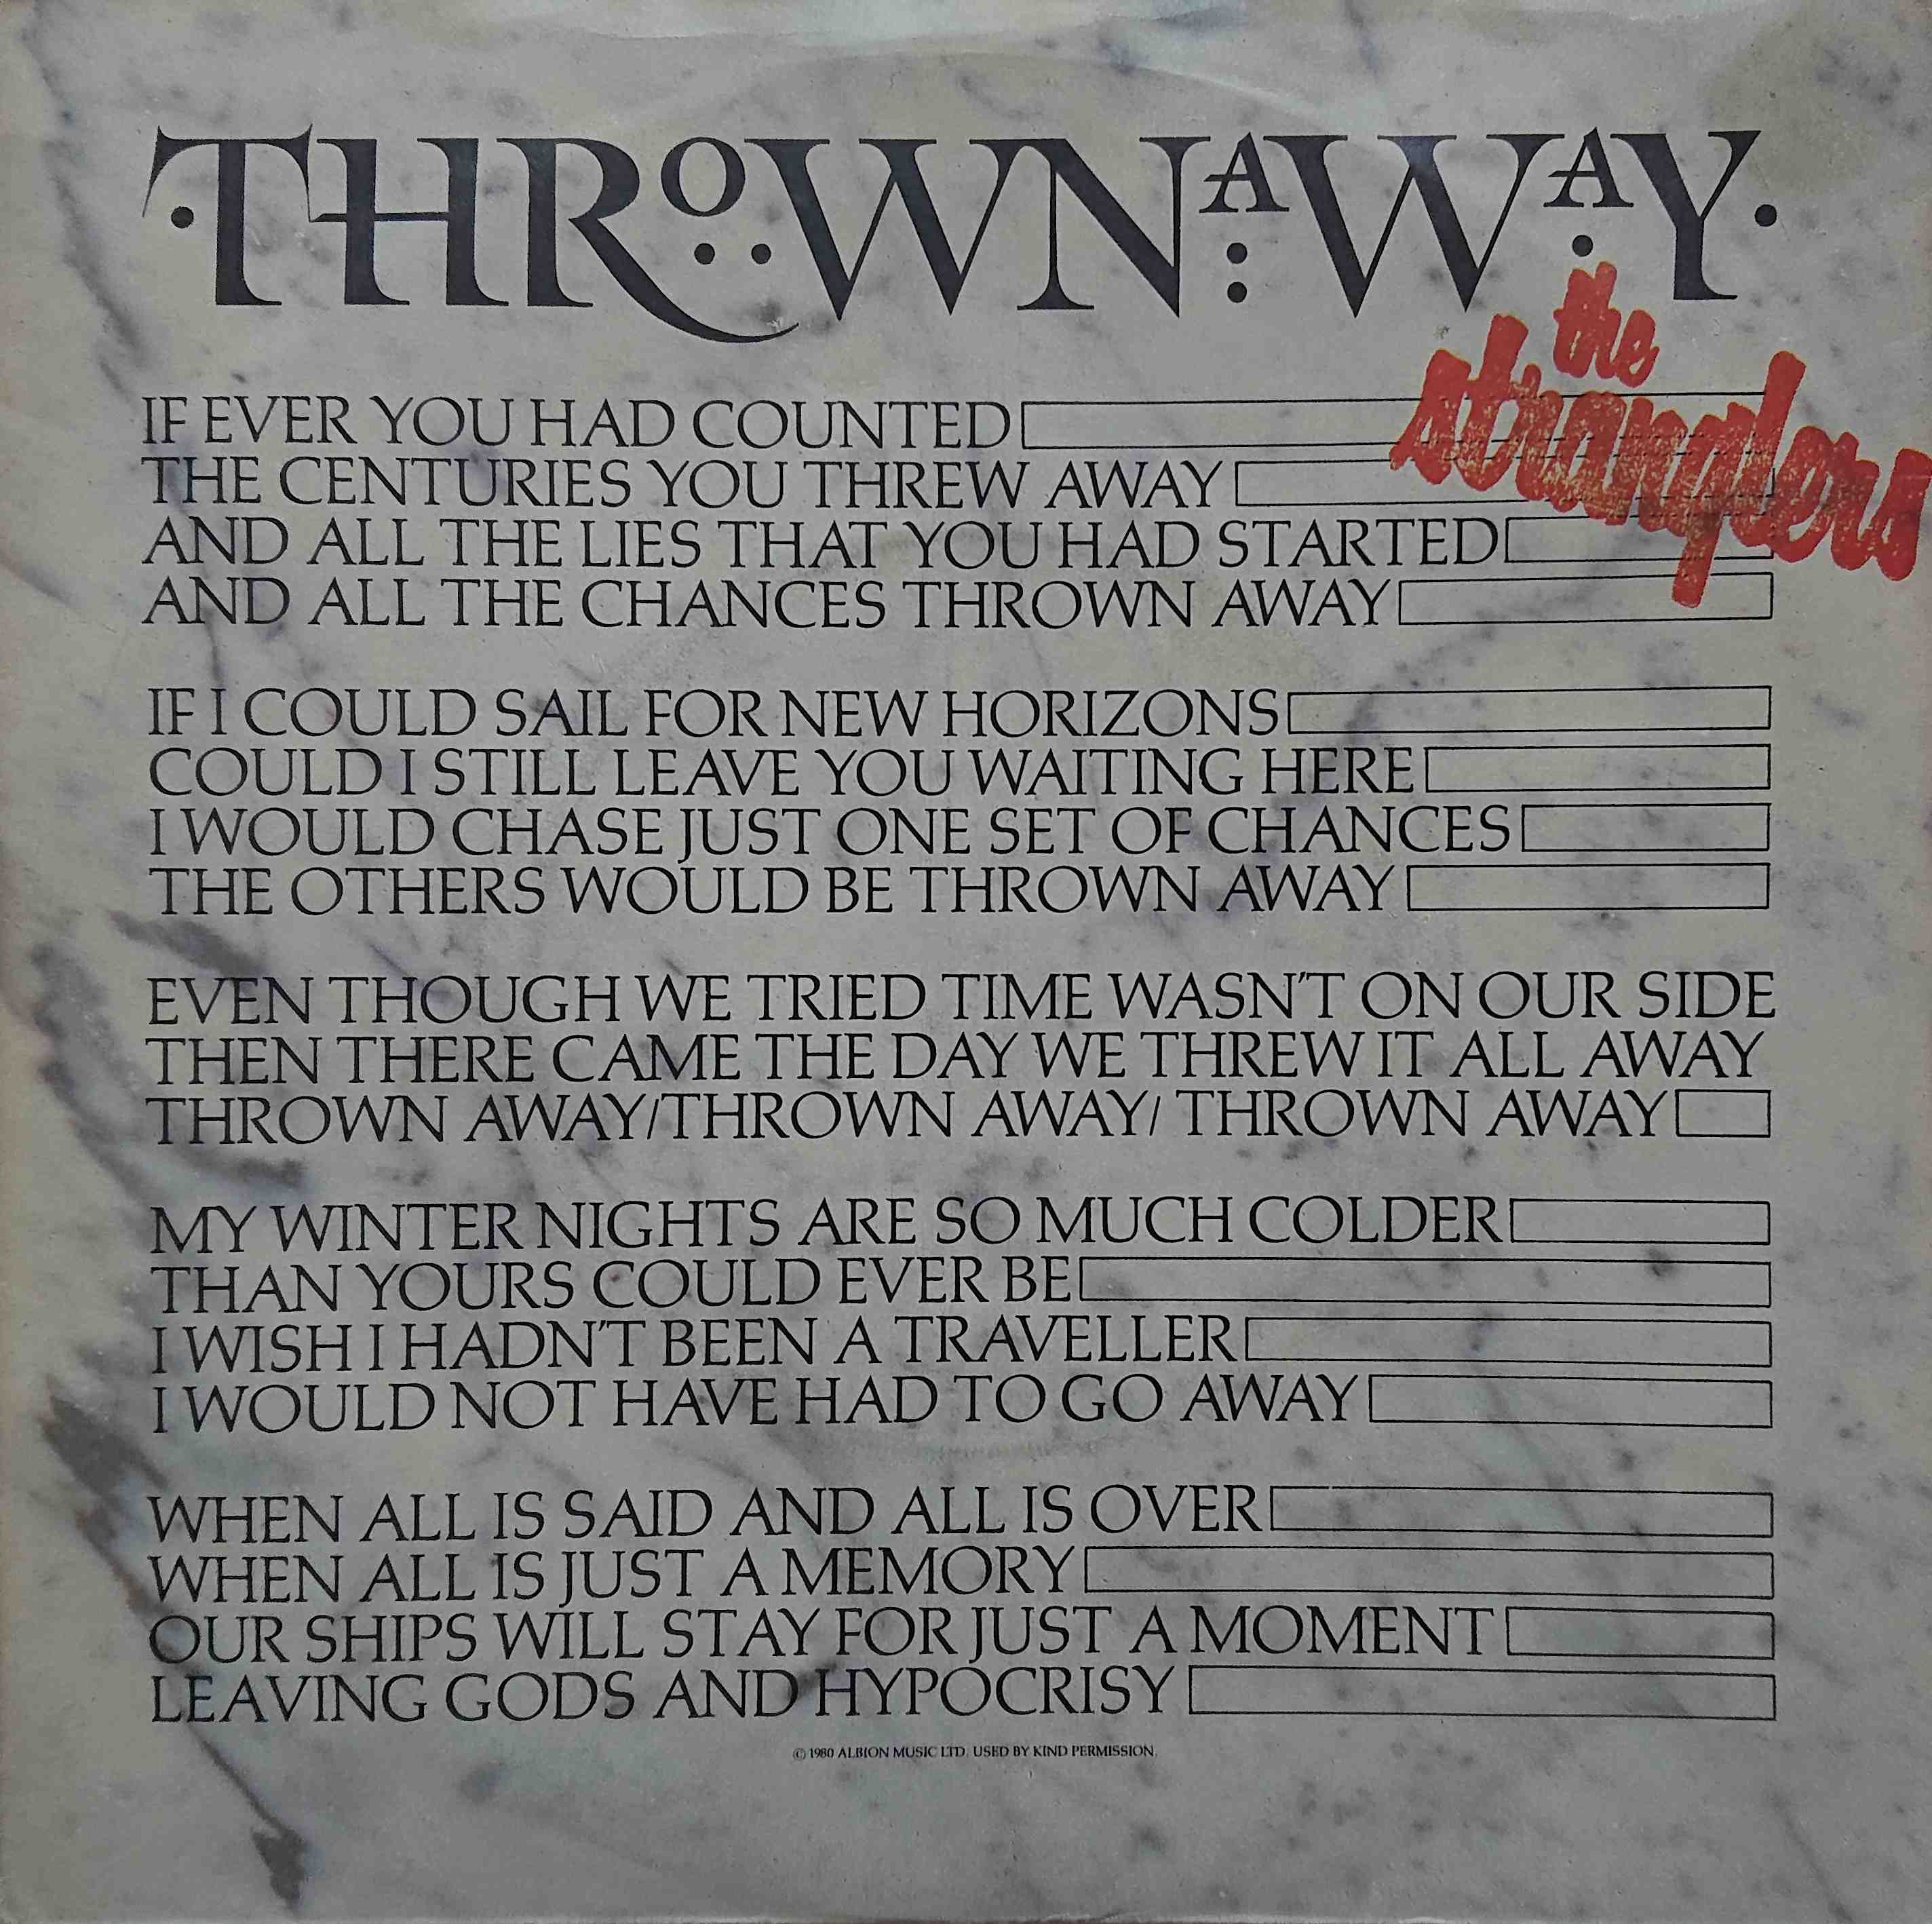 Picture of Thrown away by artist The Stranglers  from The Stranglers singles